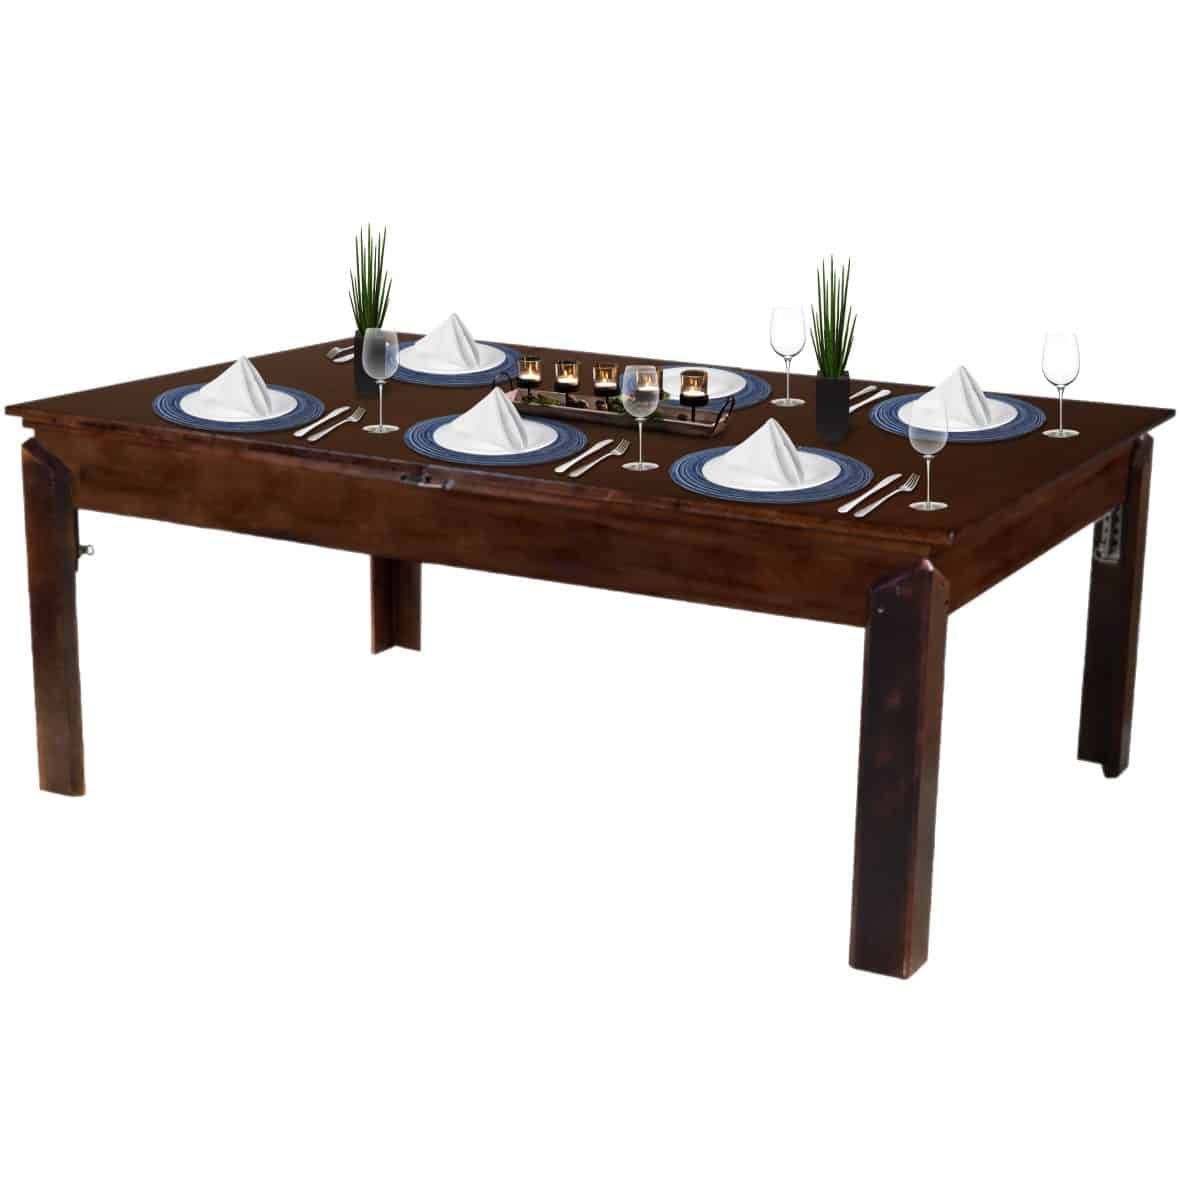 war table with decor